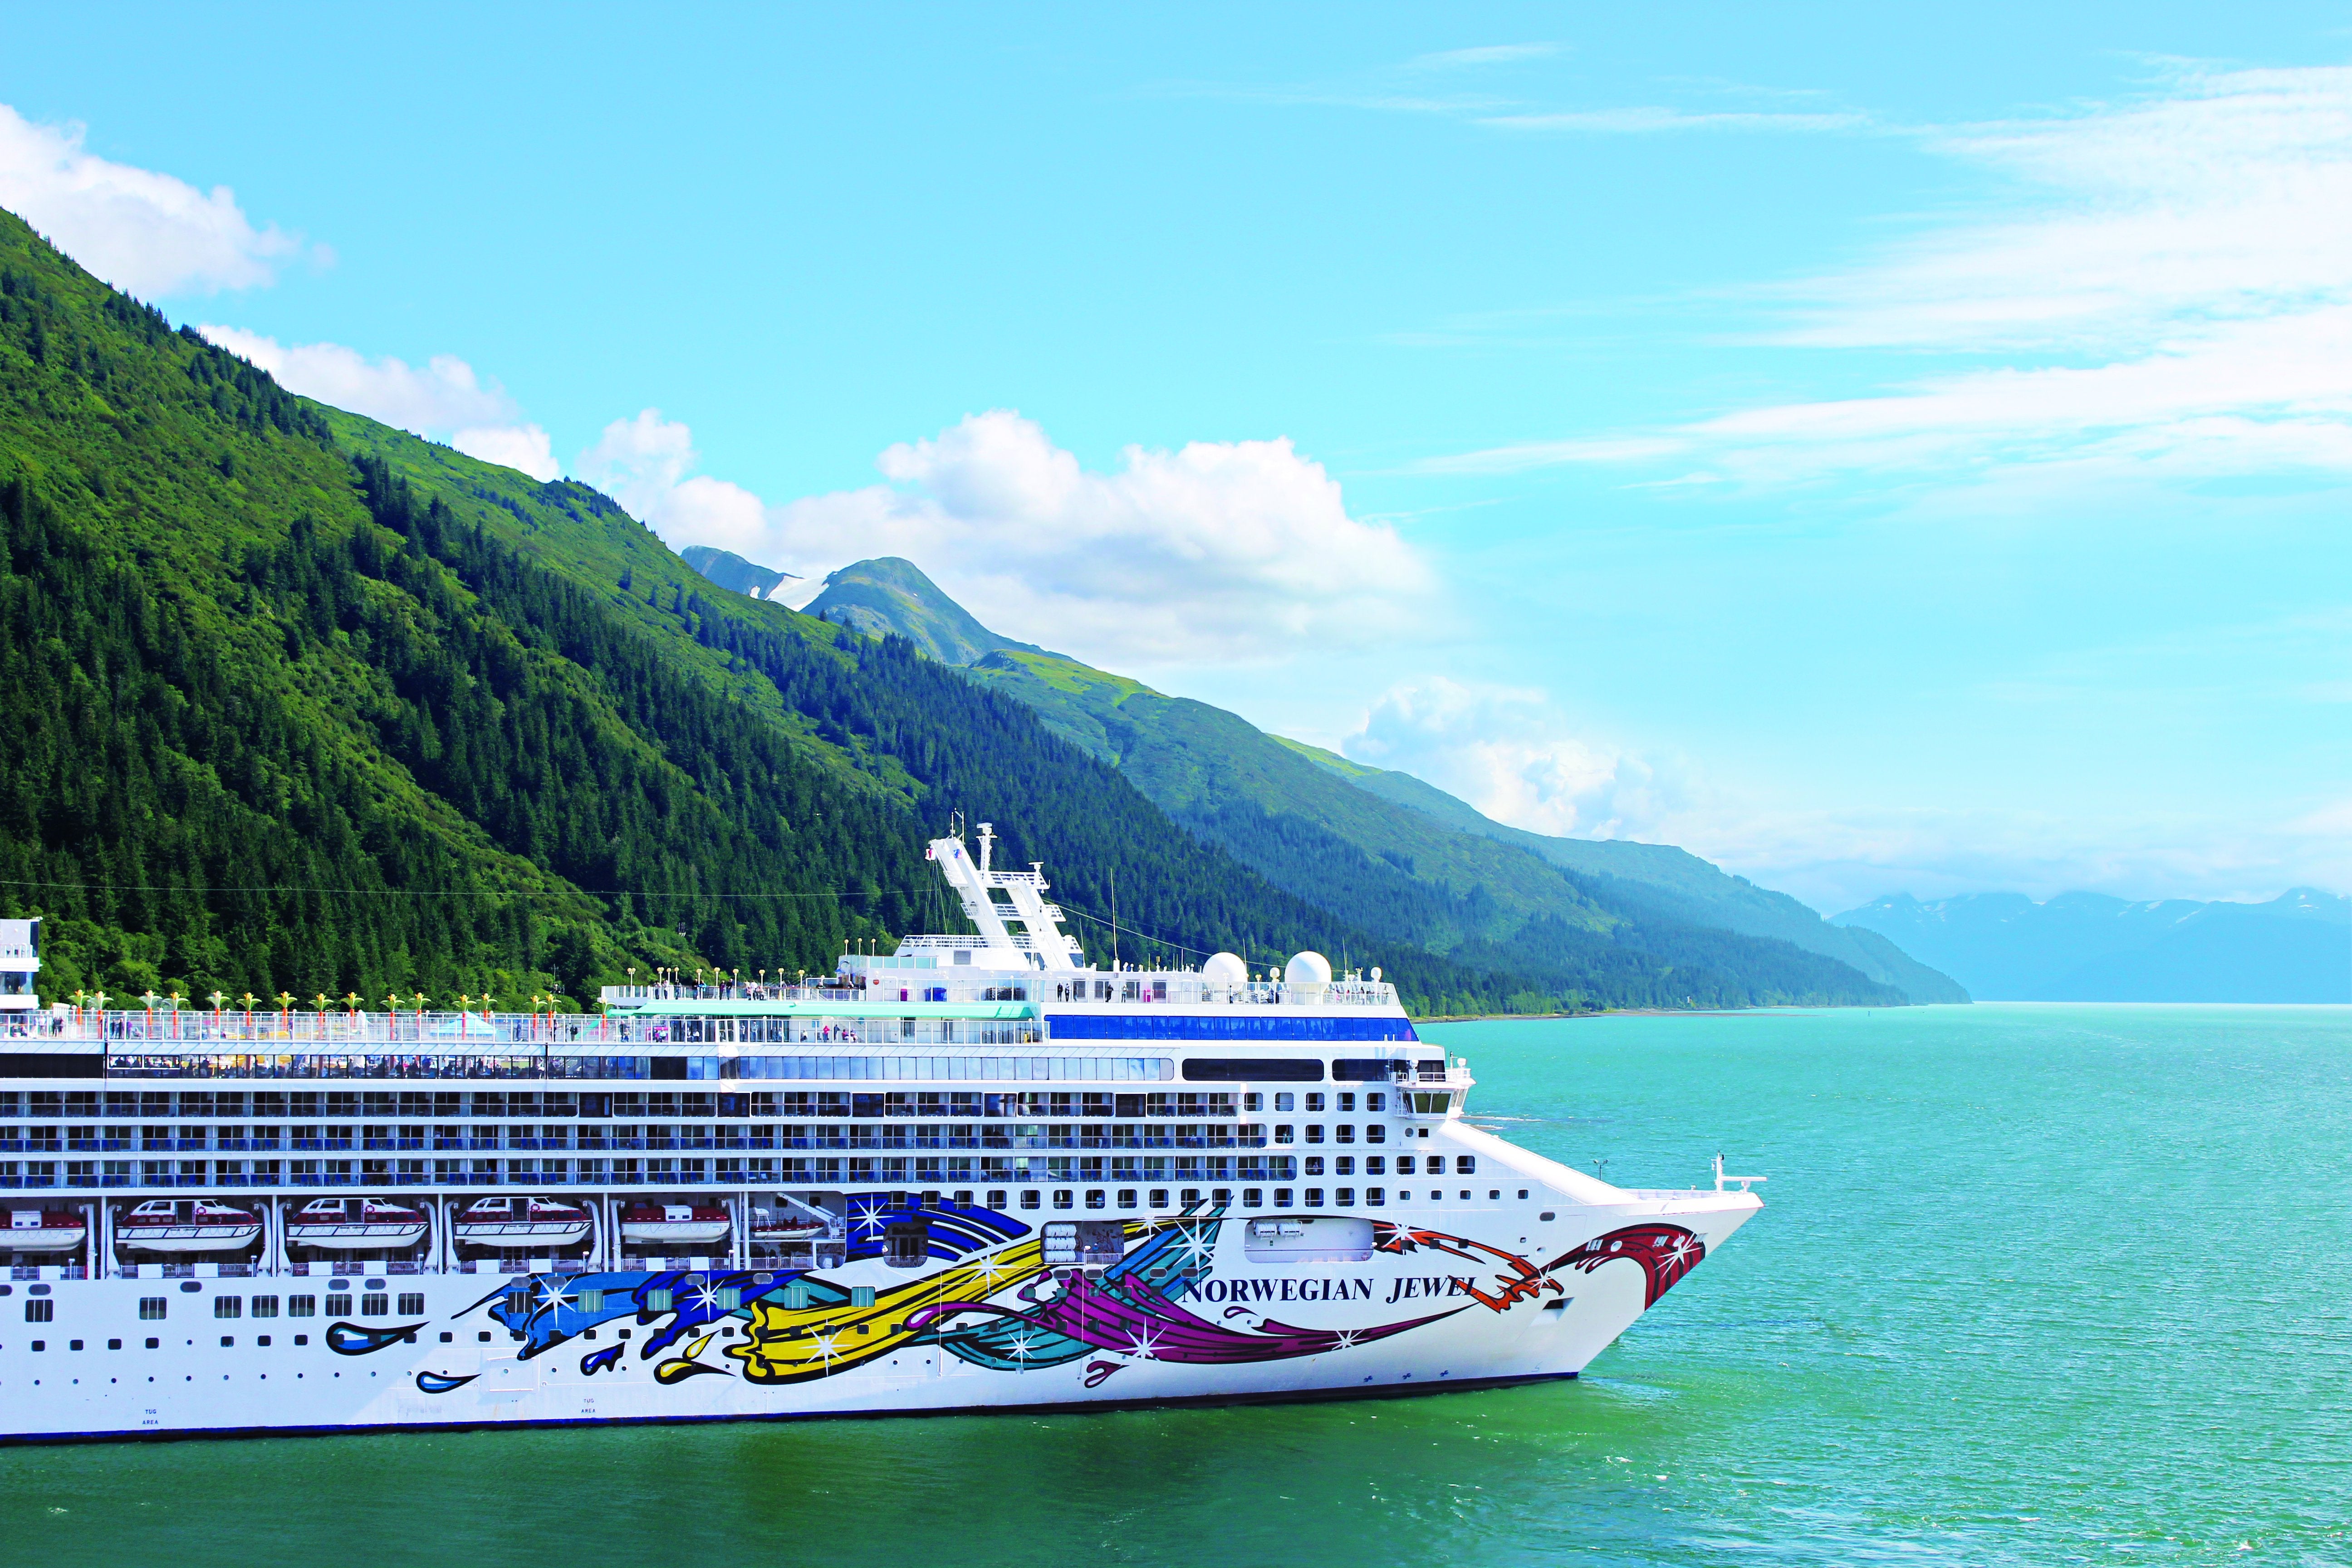 The cruise industry is back with a vengeance following a difficult couple of years